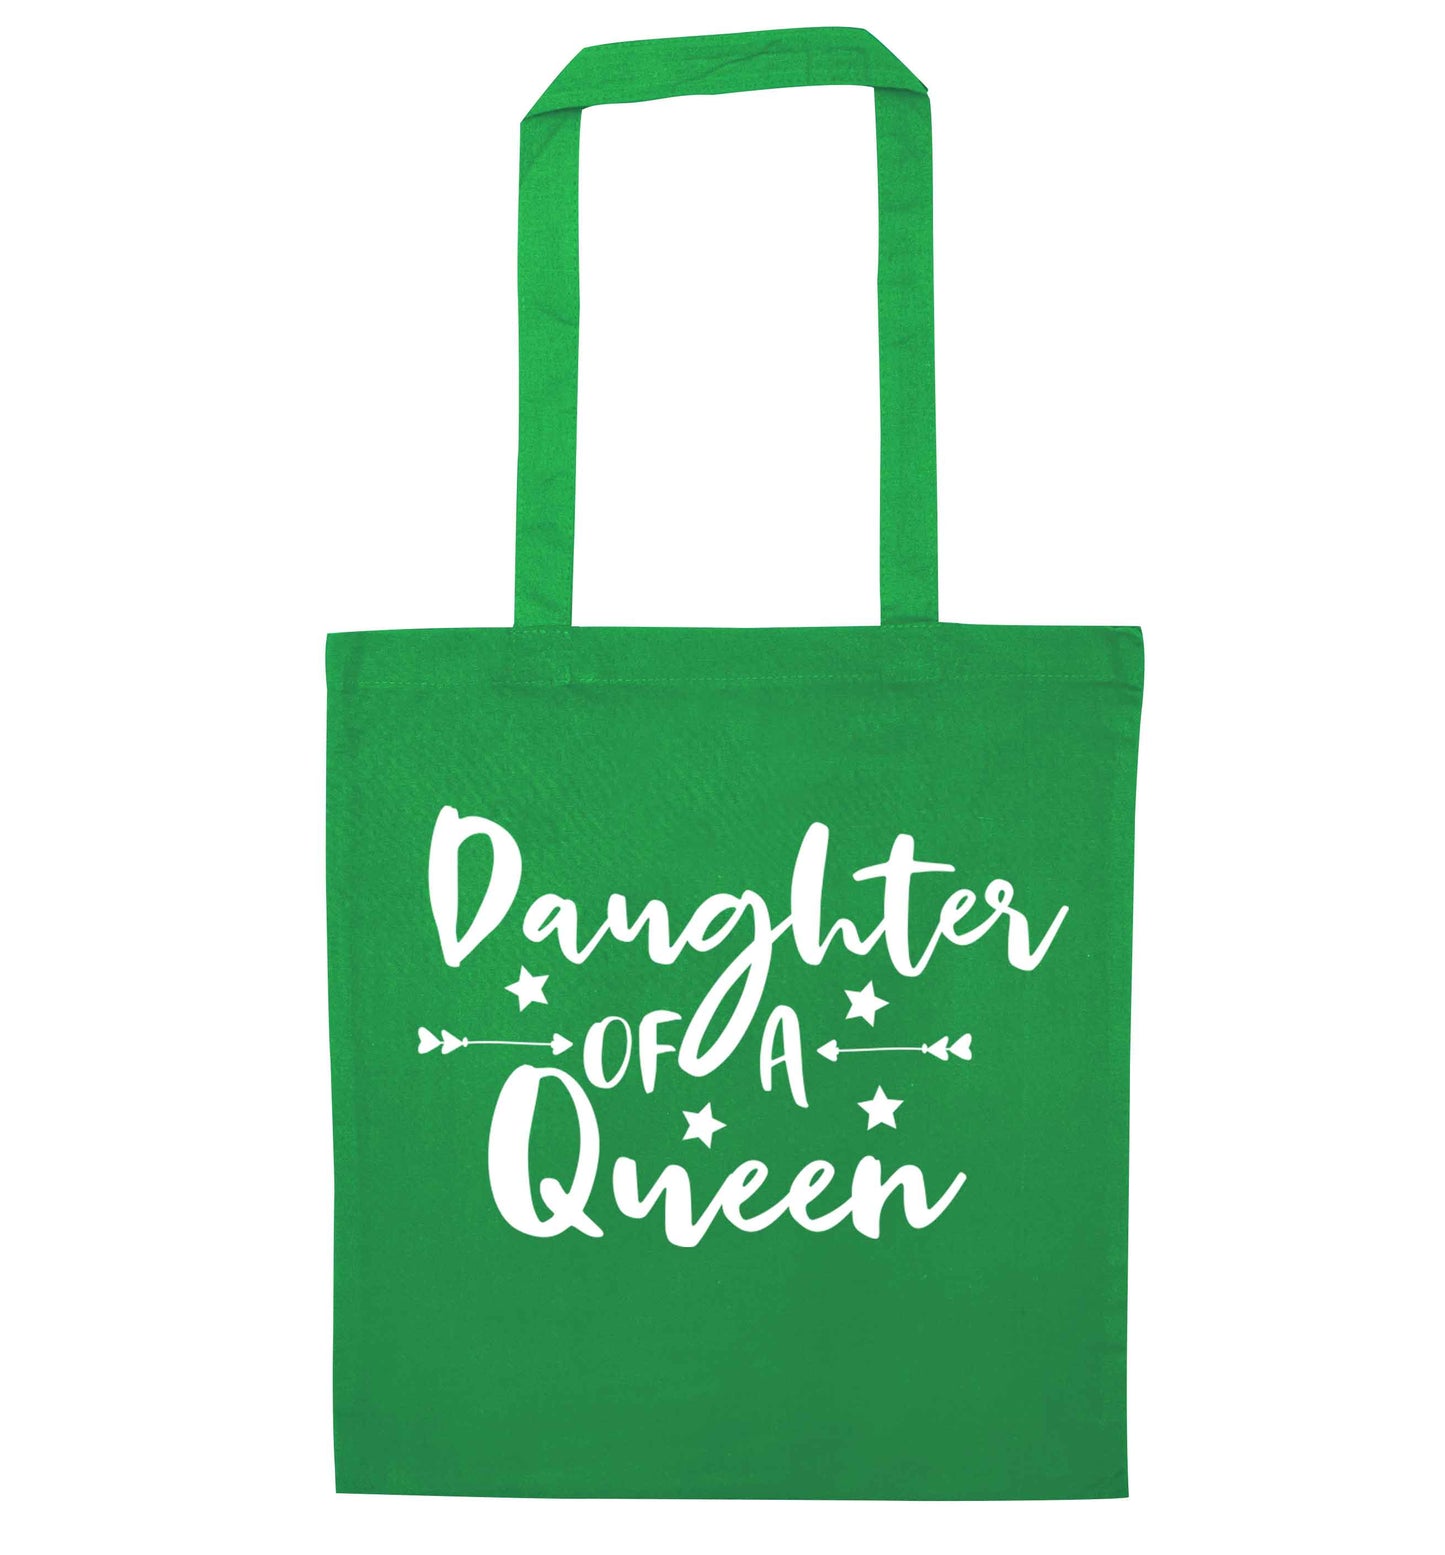 Daughter of a Queen green tote bag